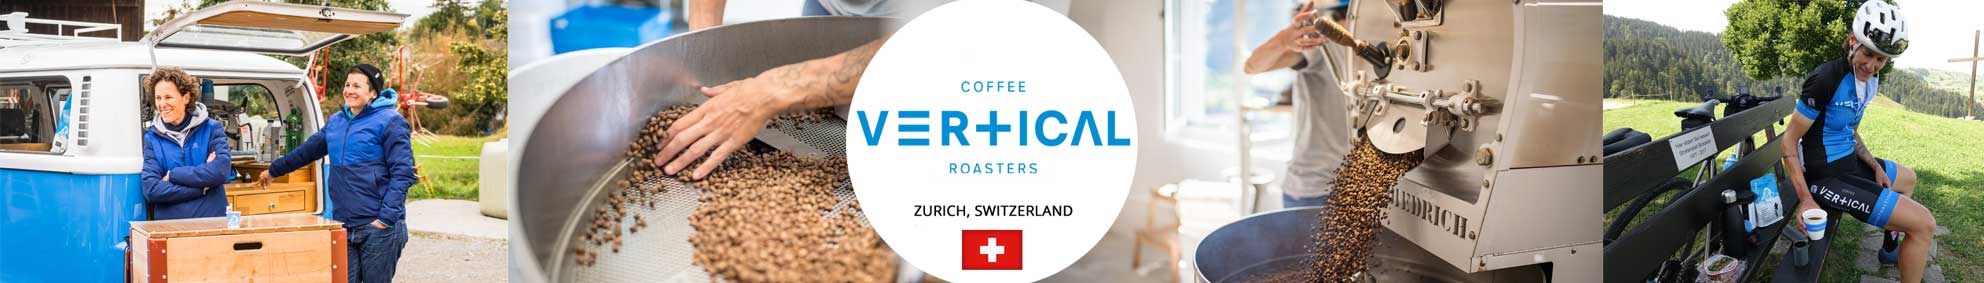 Vertical Coffee Zurich on UK Best Coffee Subscription and Gift Service